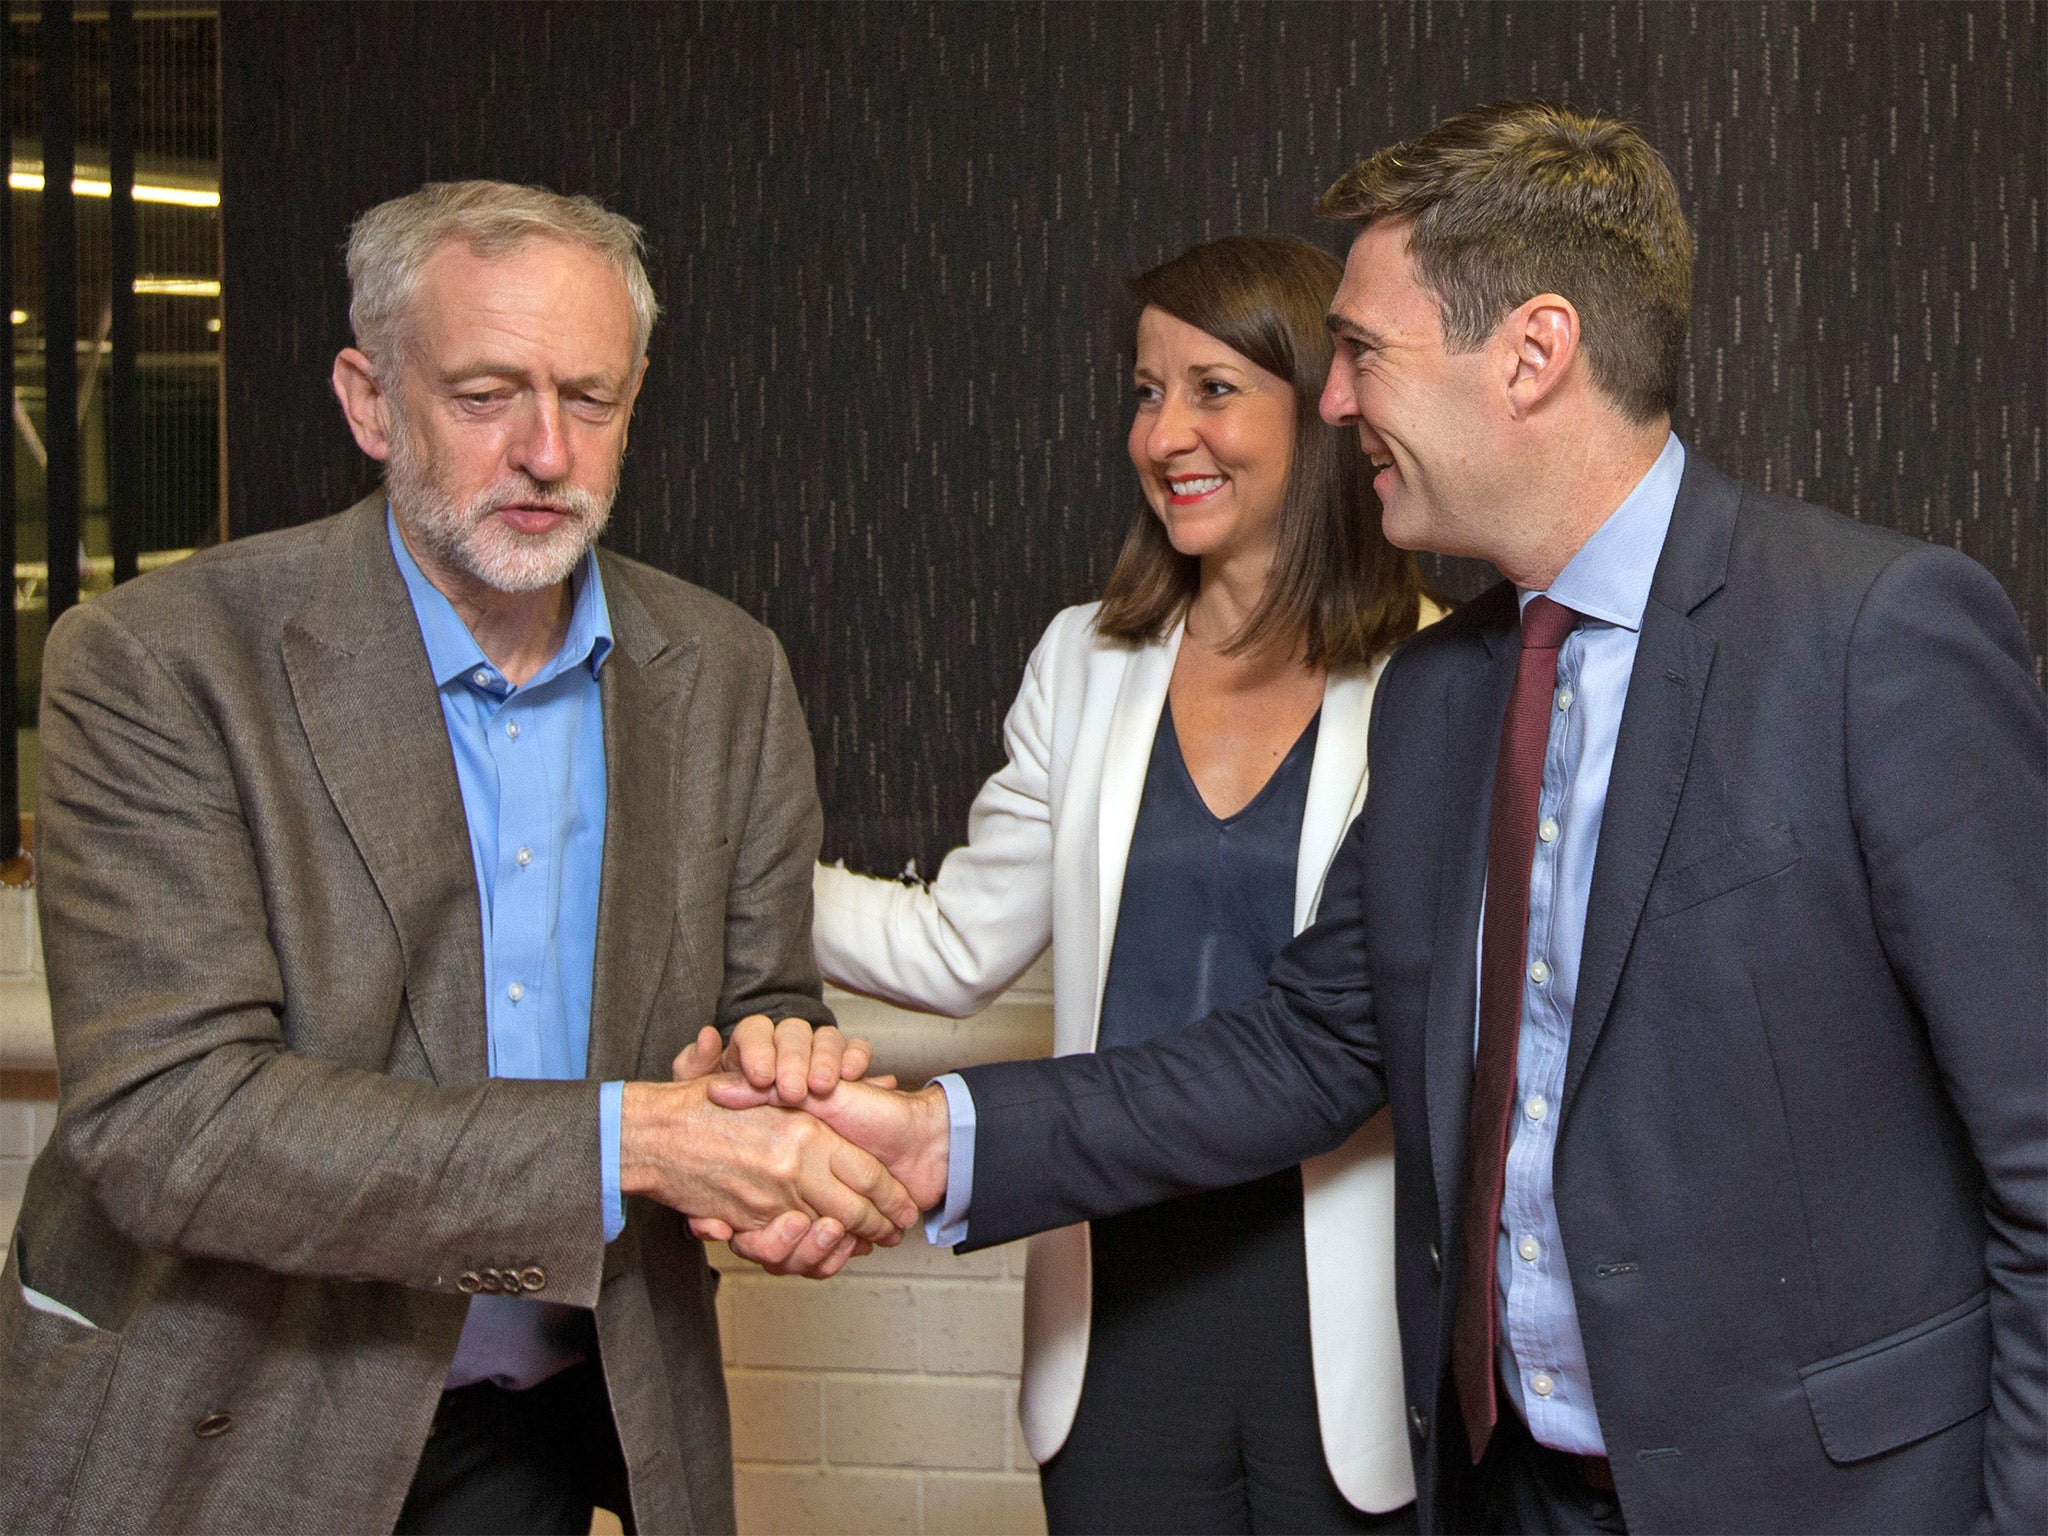 Jeremy Corbyn is greeted by fellow Labour leadership candidates Liz Kendall and Andy Burnham ahead of a radio hustings in Stevenage